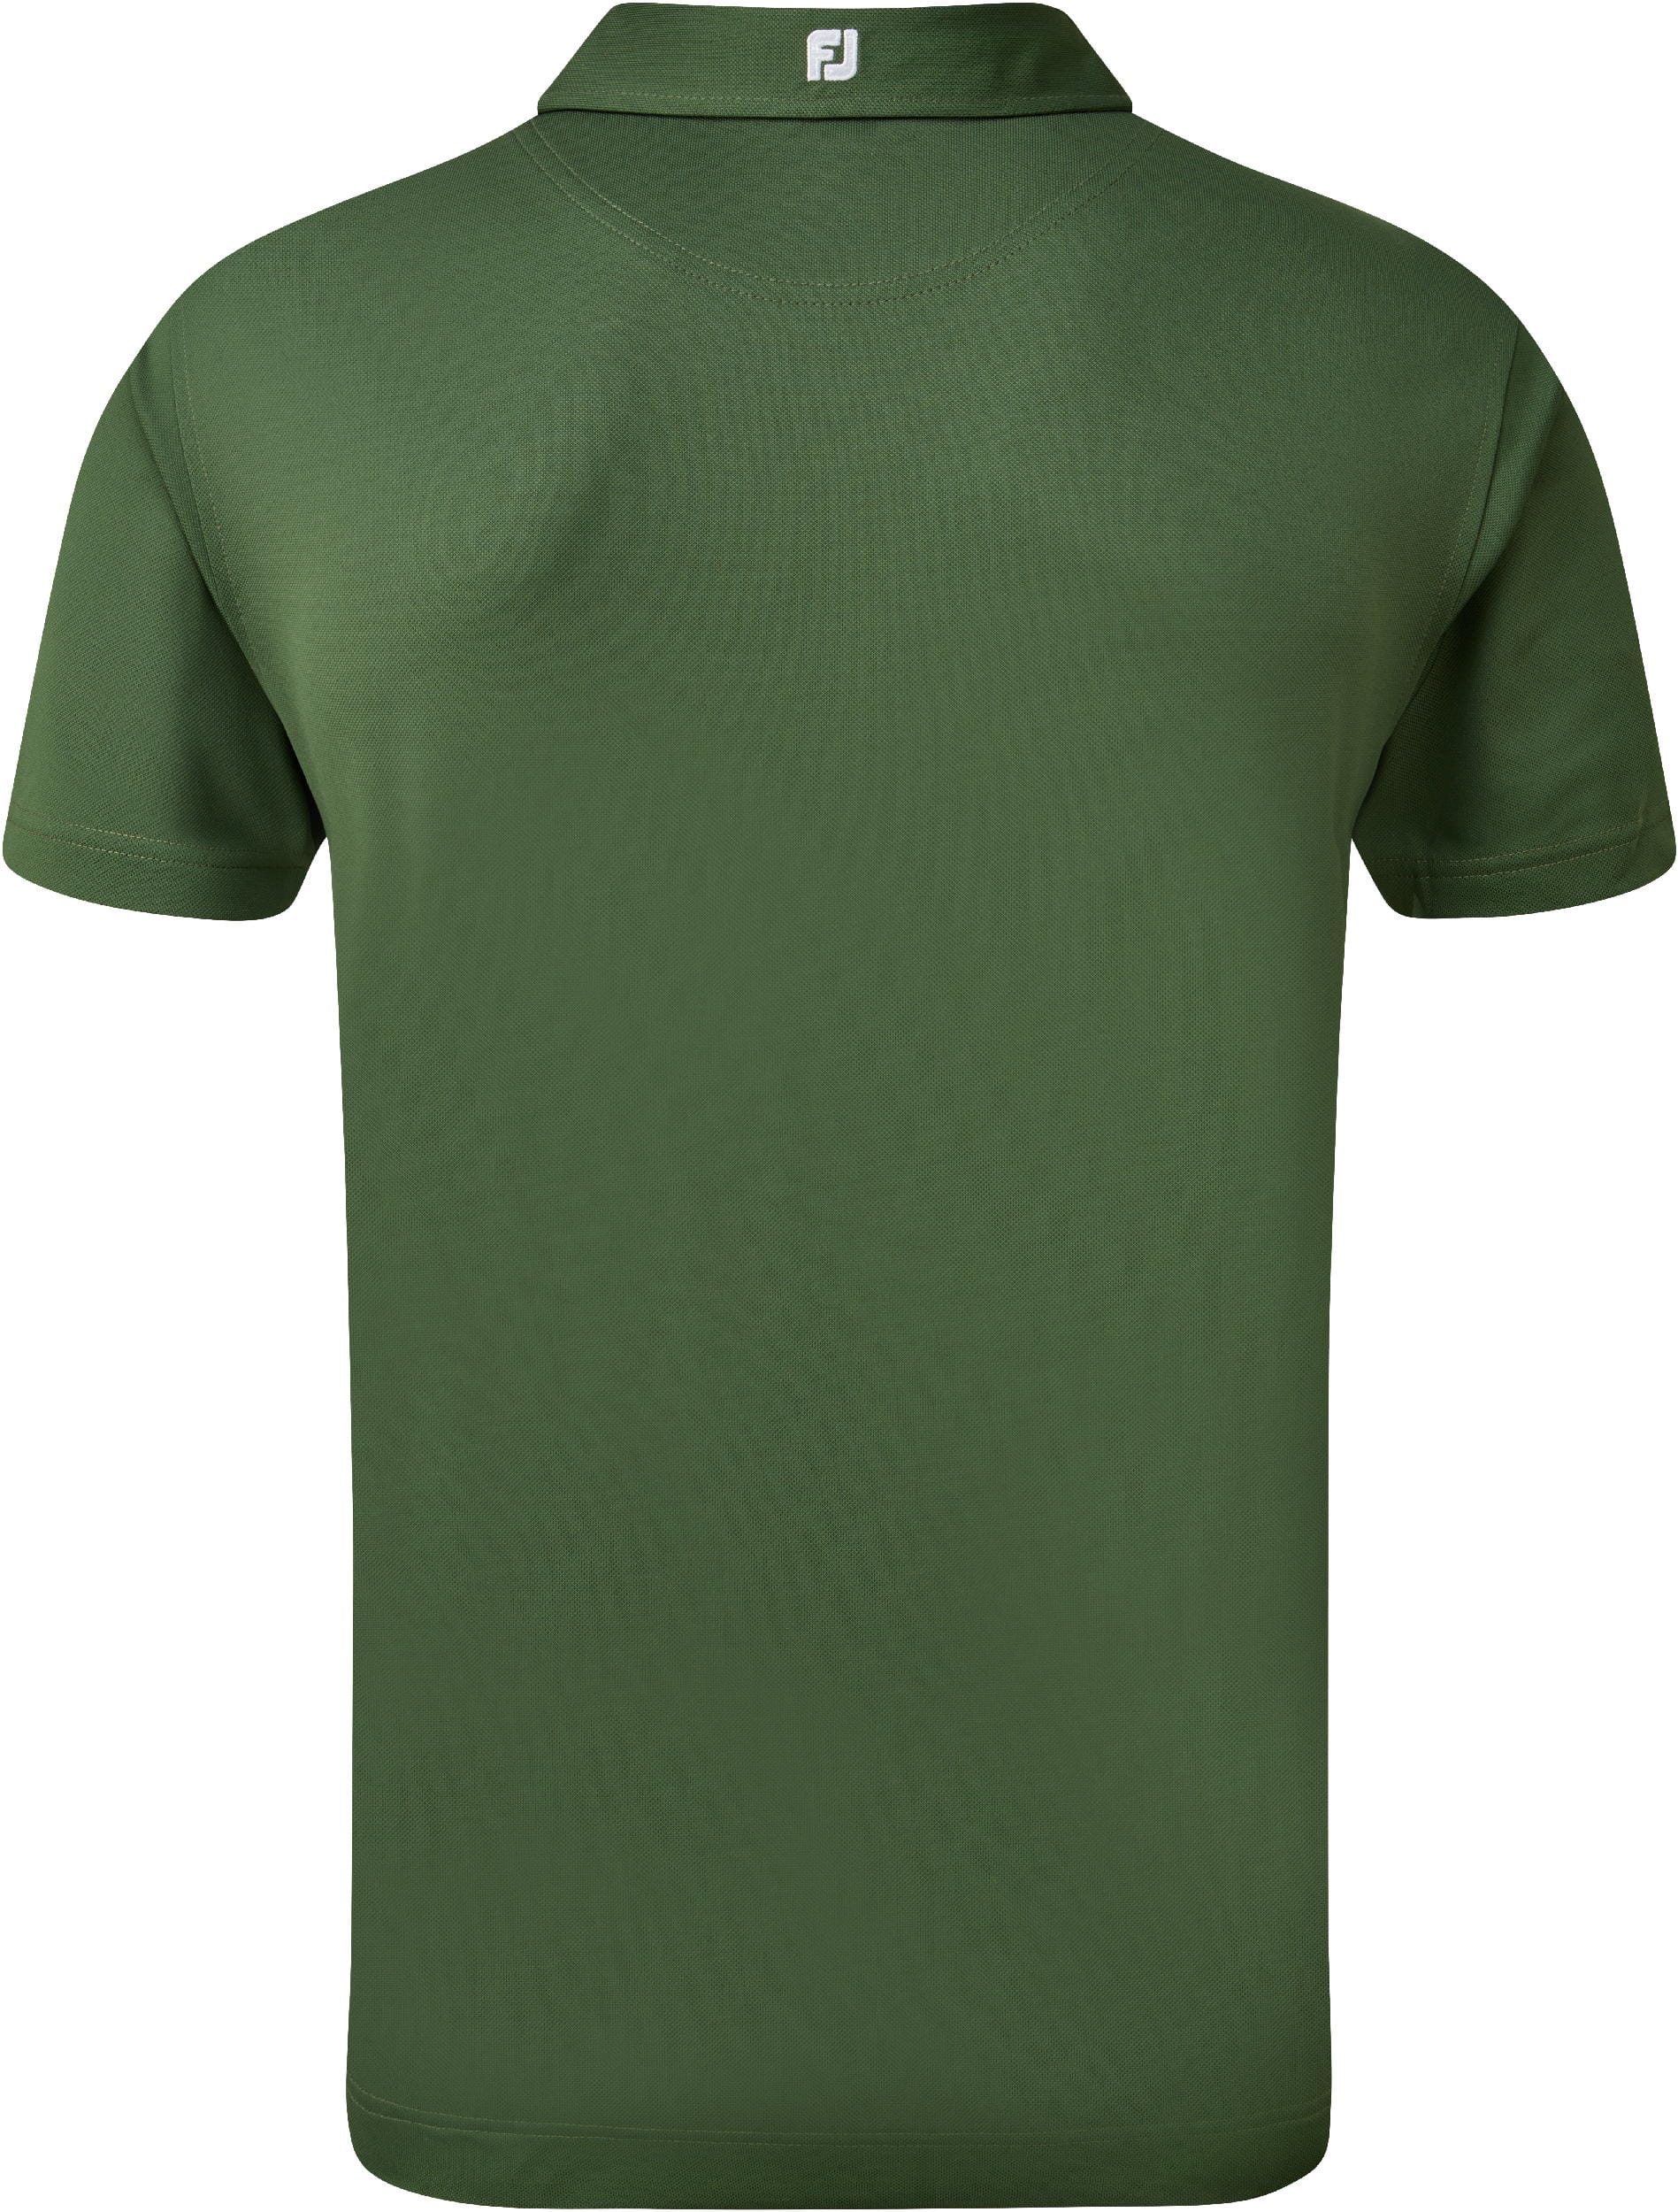 FootJoy Strech Pique Solid Polo, olive